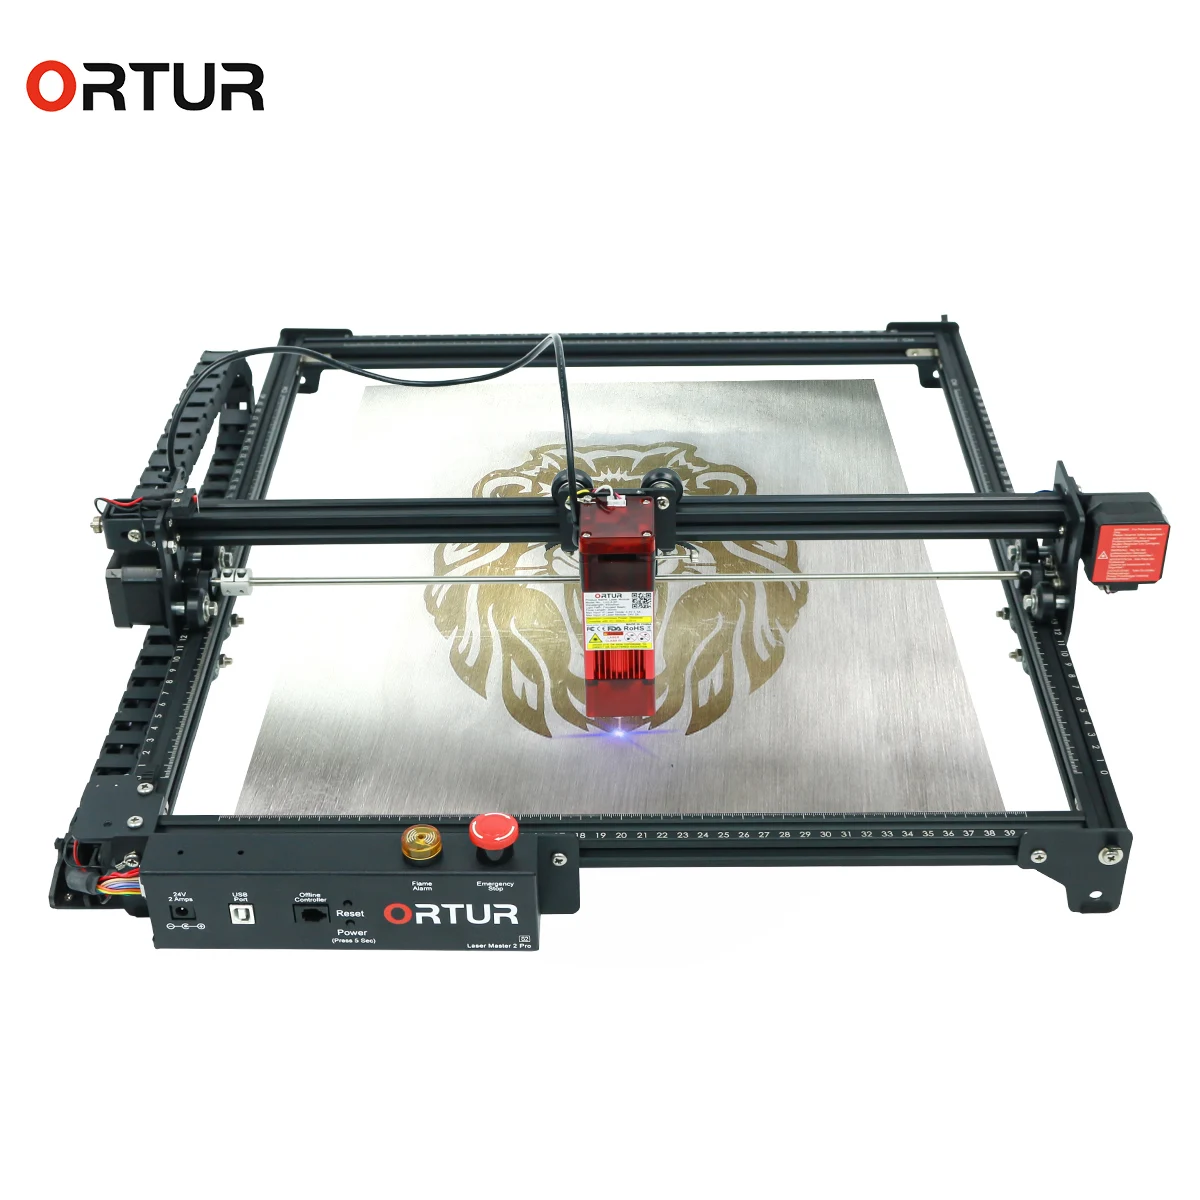 

CNC Router DIY Work Area Can Sculpt Metal Wood Cutting Engraving Machine laser engraver